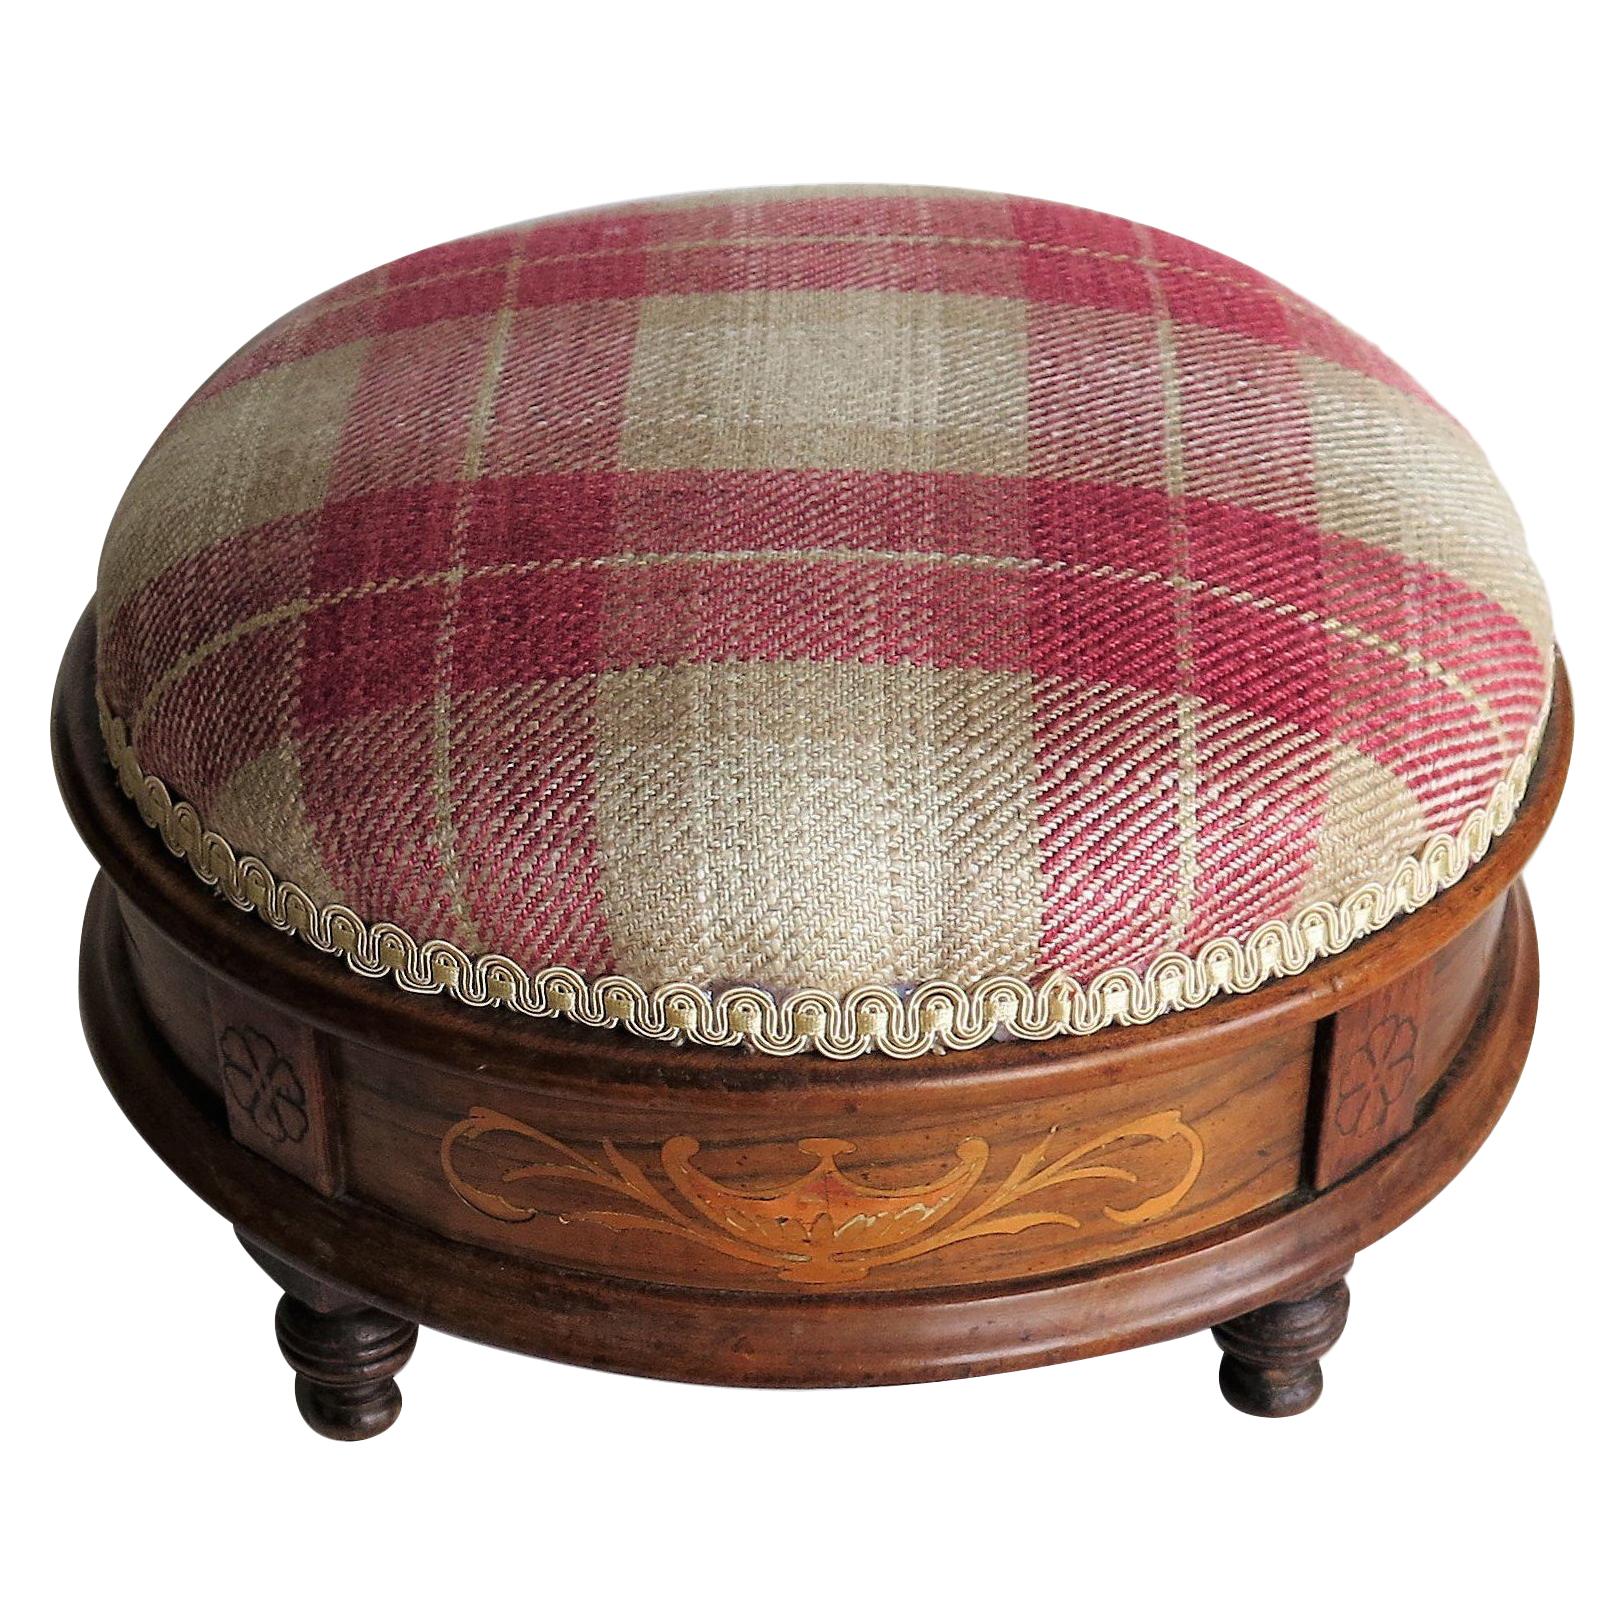 Early Victorian Foot Stool Walnut with Marquetry Inlay Re-Upholstered circa 1845